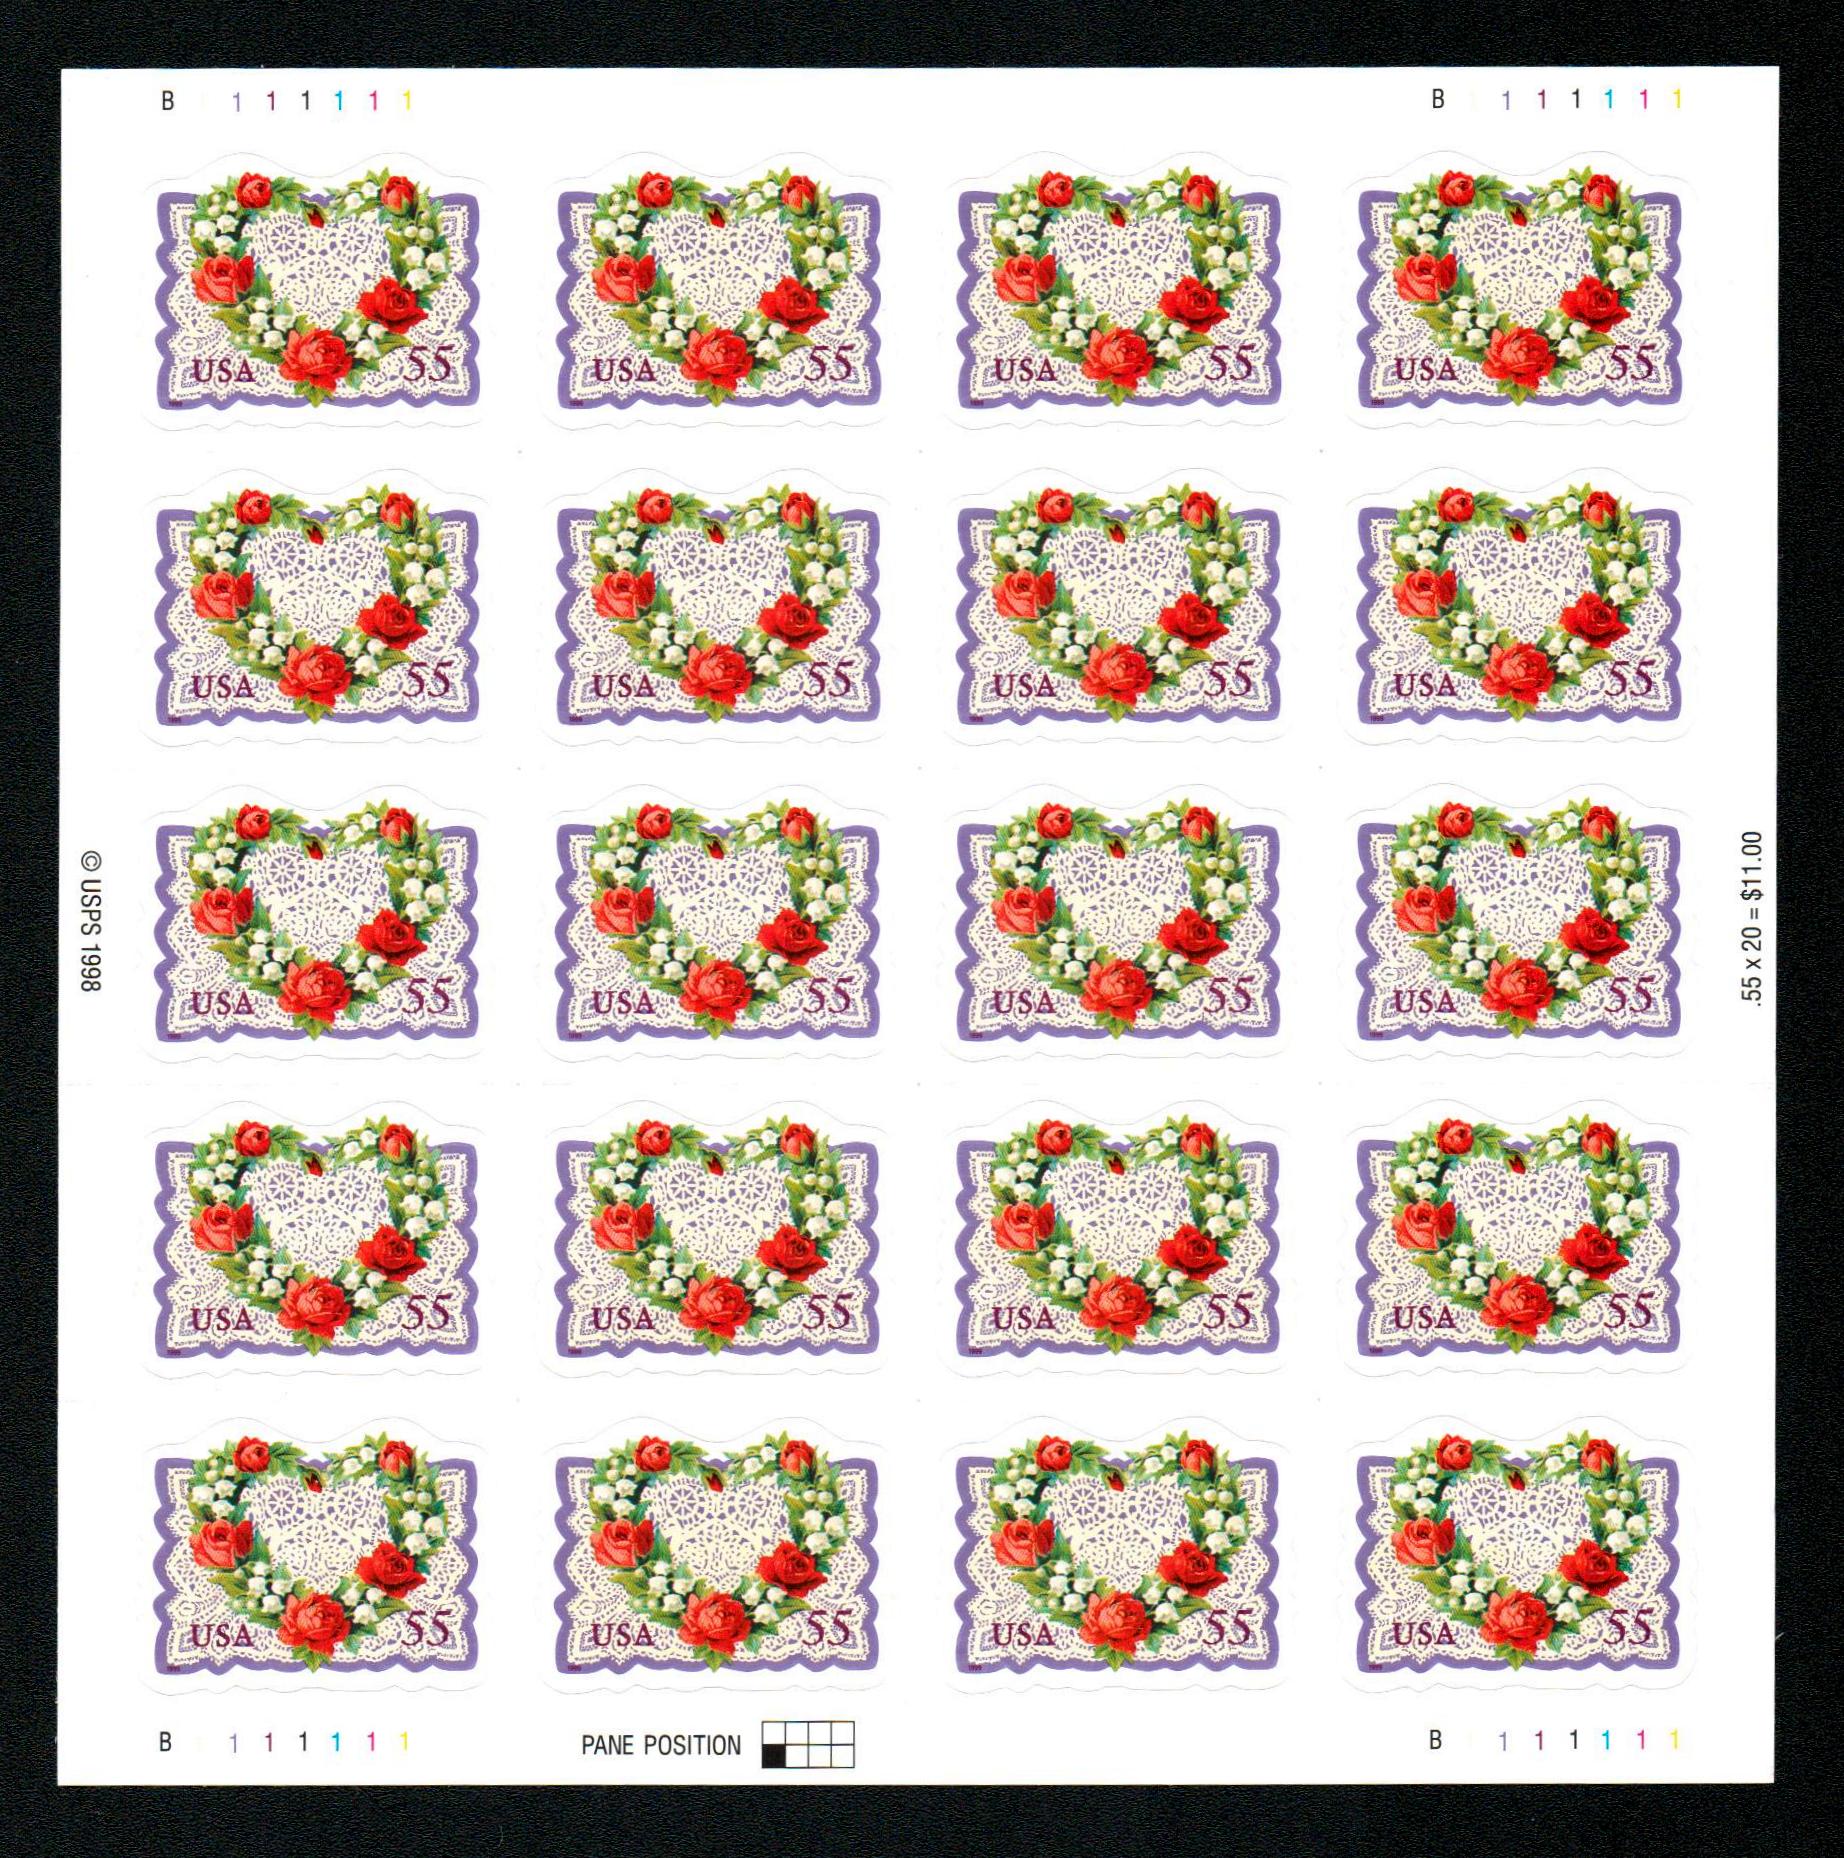 Love: Victorian Heart with Roses, Lily of the Valley and Lace, Full  Convertible Booklet of 20 x 33-Cent Postage Stamps, USA 1999, Scott 3274